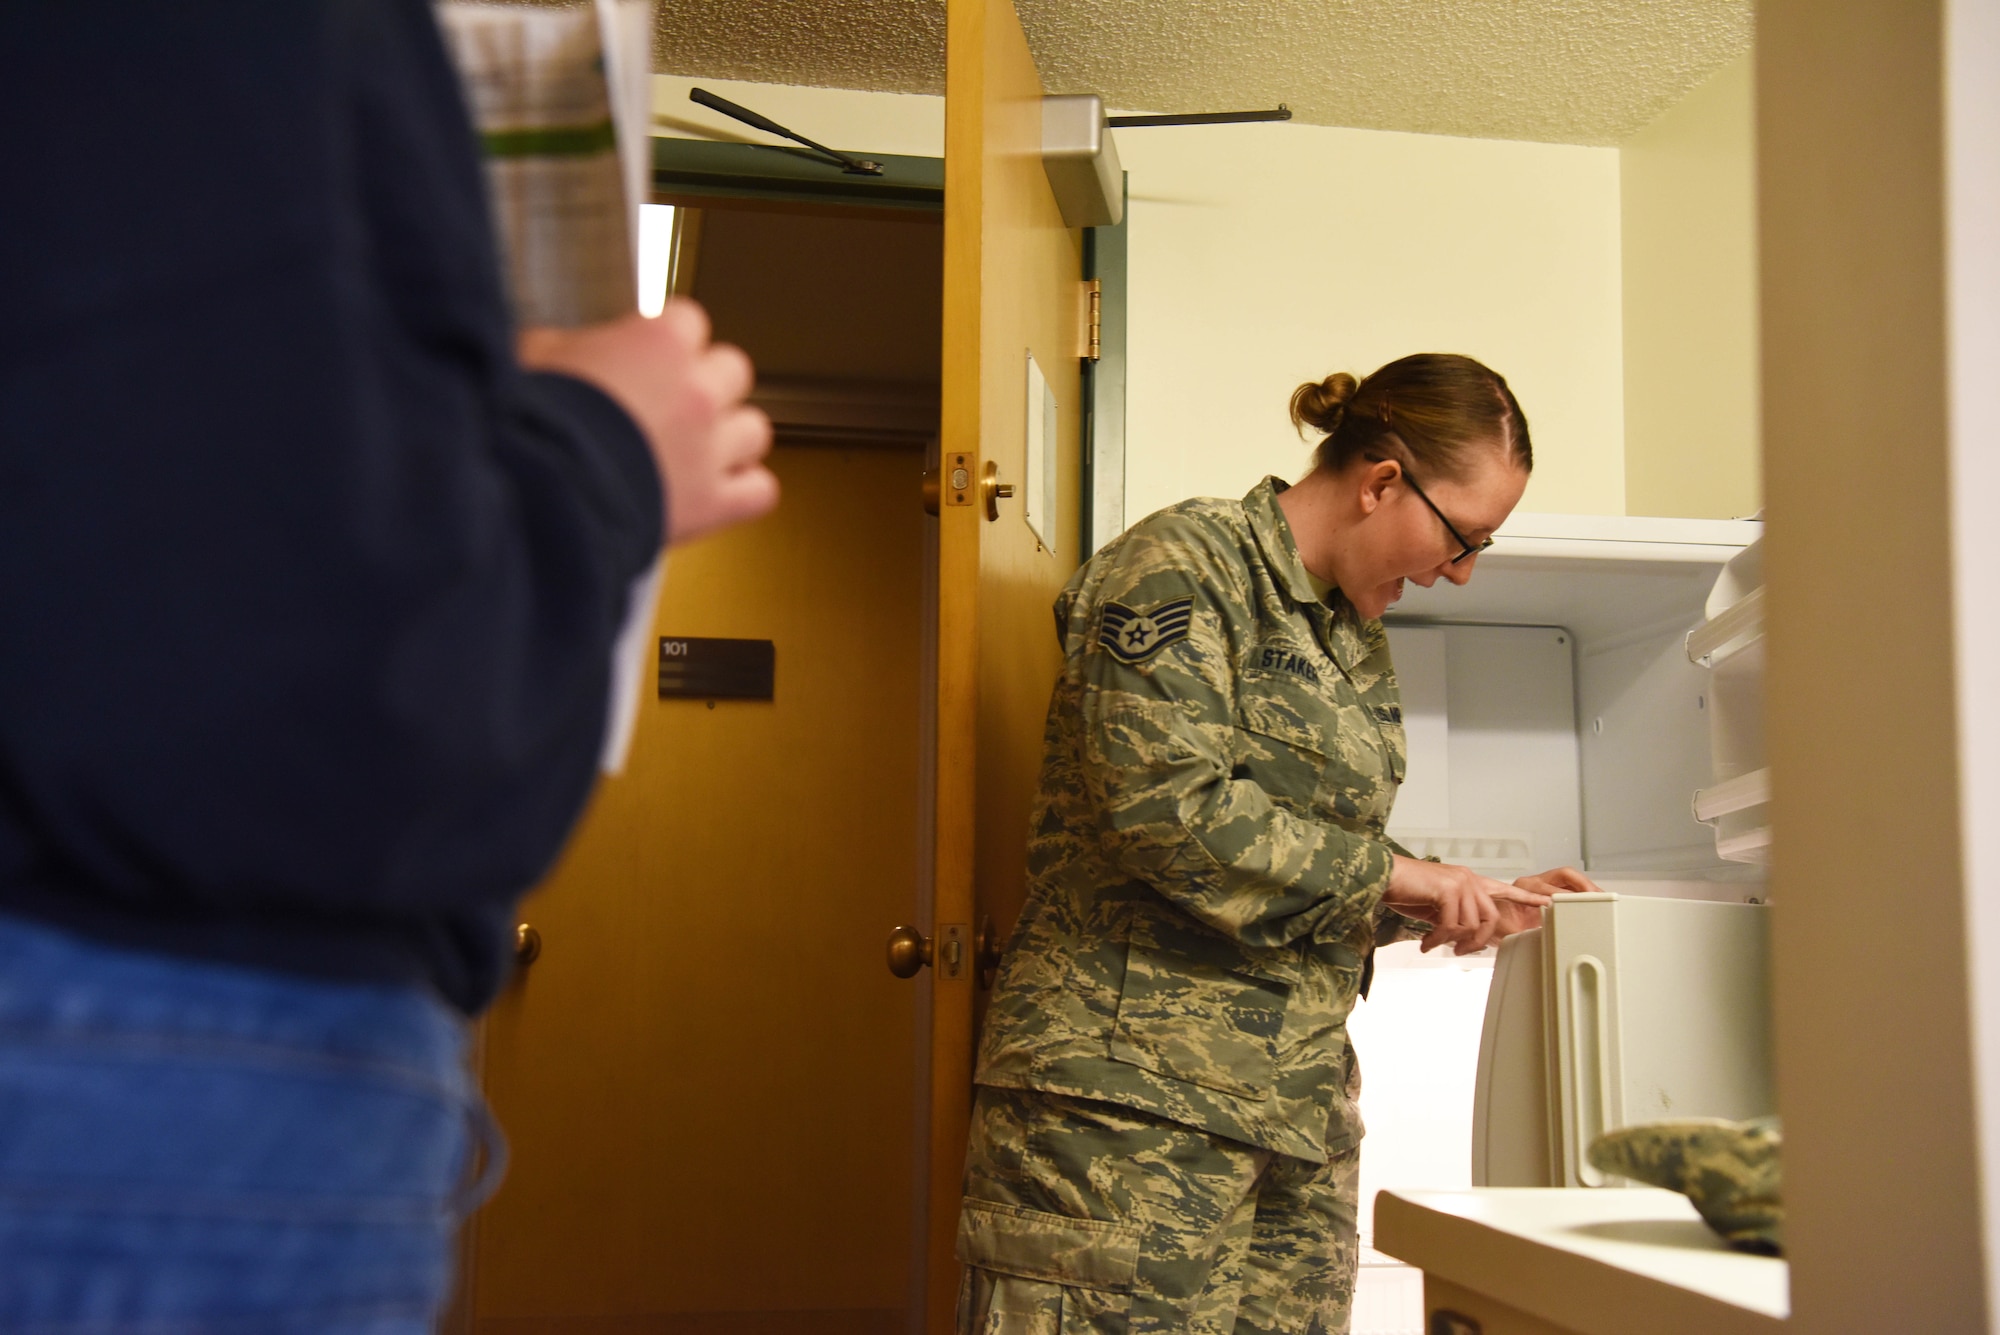 Staff Sgt. Hailey Staker, an Airman dorm leader, inspects the refrigerator of Airman 1st Class Casi Smith, a 28th Security Forces response force leader, at Ellsworth Air Force Base, S.D., July 17, 2018. Dorm leaders check every part of dorm rooms for Airmen out-processing for potential health and safety hazards. (U.S. Air Force photo by Airman 1st Class Thomas Karol)